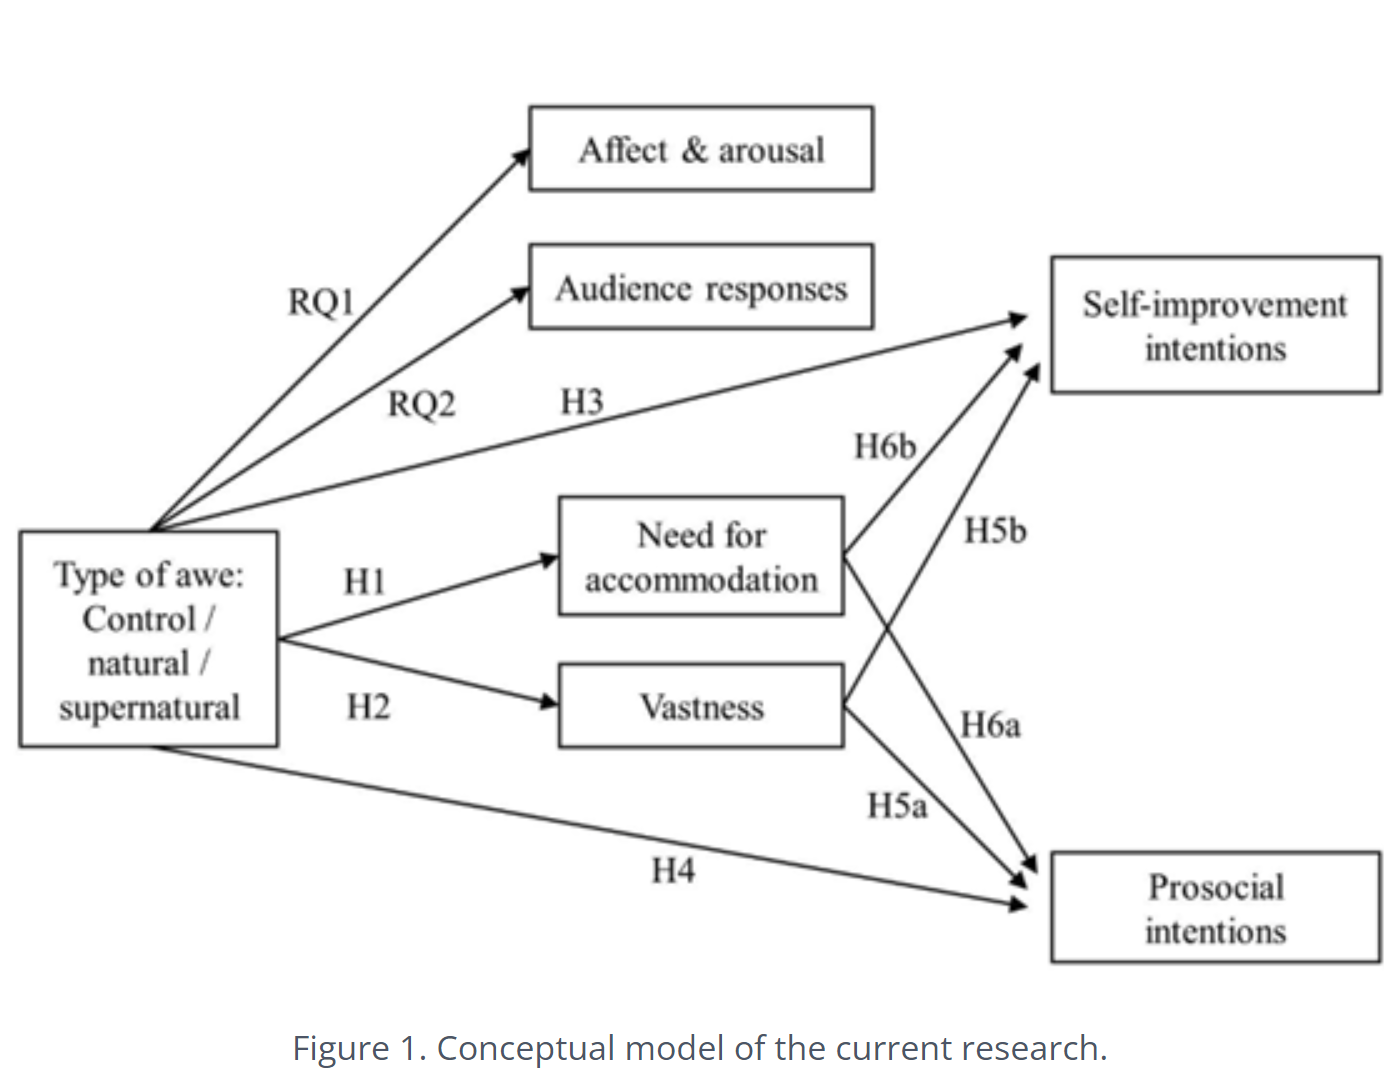 A flowchart representing the article’s research questions and hypothesis. On the far left there is a box with ‘type of awe: control/natural/supernatural’ with 6 arrows coming off it, representing the two core research questions and first four hypotheses of the research paper. The arrow for research question one points towards the text box ‘affect and arousal’. The arrow for research question two points towards the text box ‘audience responses’. The arrow for hypothesis one points towards the text box ‘need for accommodation’. The arrow for hypothesis two points towards the text box ‘vastness’. The arrow for hypothesis three points towards the text box ‘self-improvement intentions’. The arrow for hypothesis four points towards the text box ‘prosocial intentions. There are two further hypotheses represented by four arrows. The arrow for hypothesis 5a goes from the text box ‘vastness’ to ‘prosocial intentions’ and 5b goes from ‘vastness’ to ;self-improvement intentions’. The arrow for hypothesis 6a goes form the text box ‘need for accommodation’ to ‘prosocial intentions’, and 6b goes from ‘need from accommodation’ to ‘self-improvement intentions’.